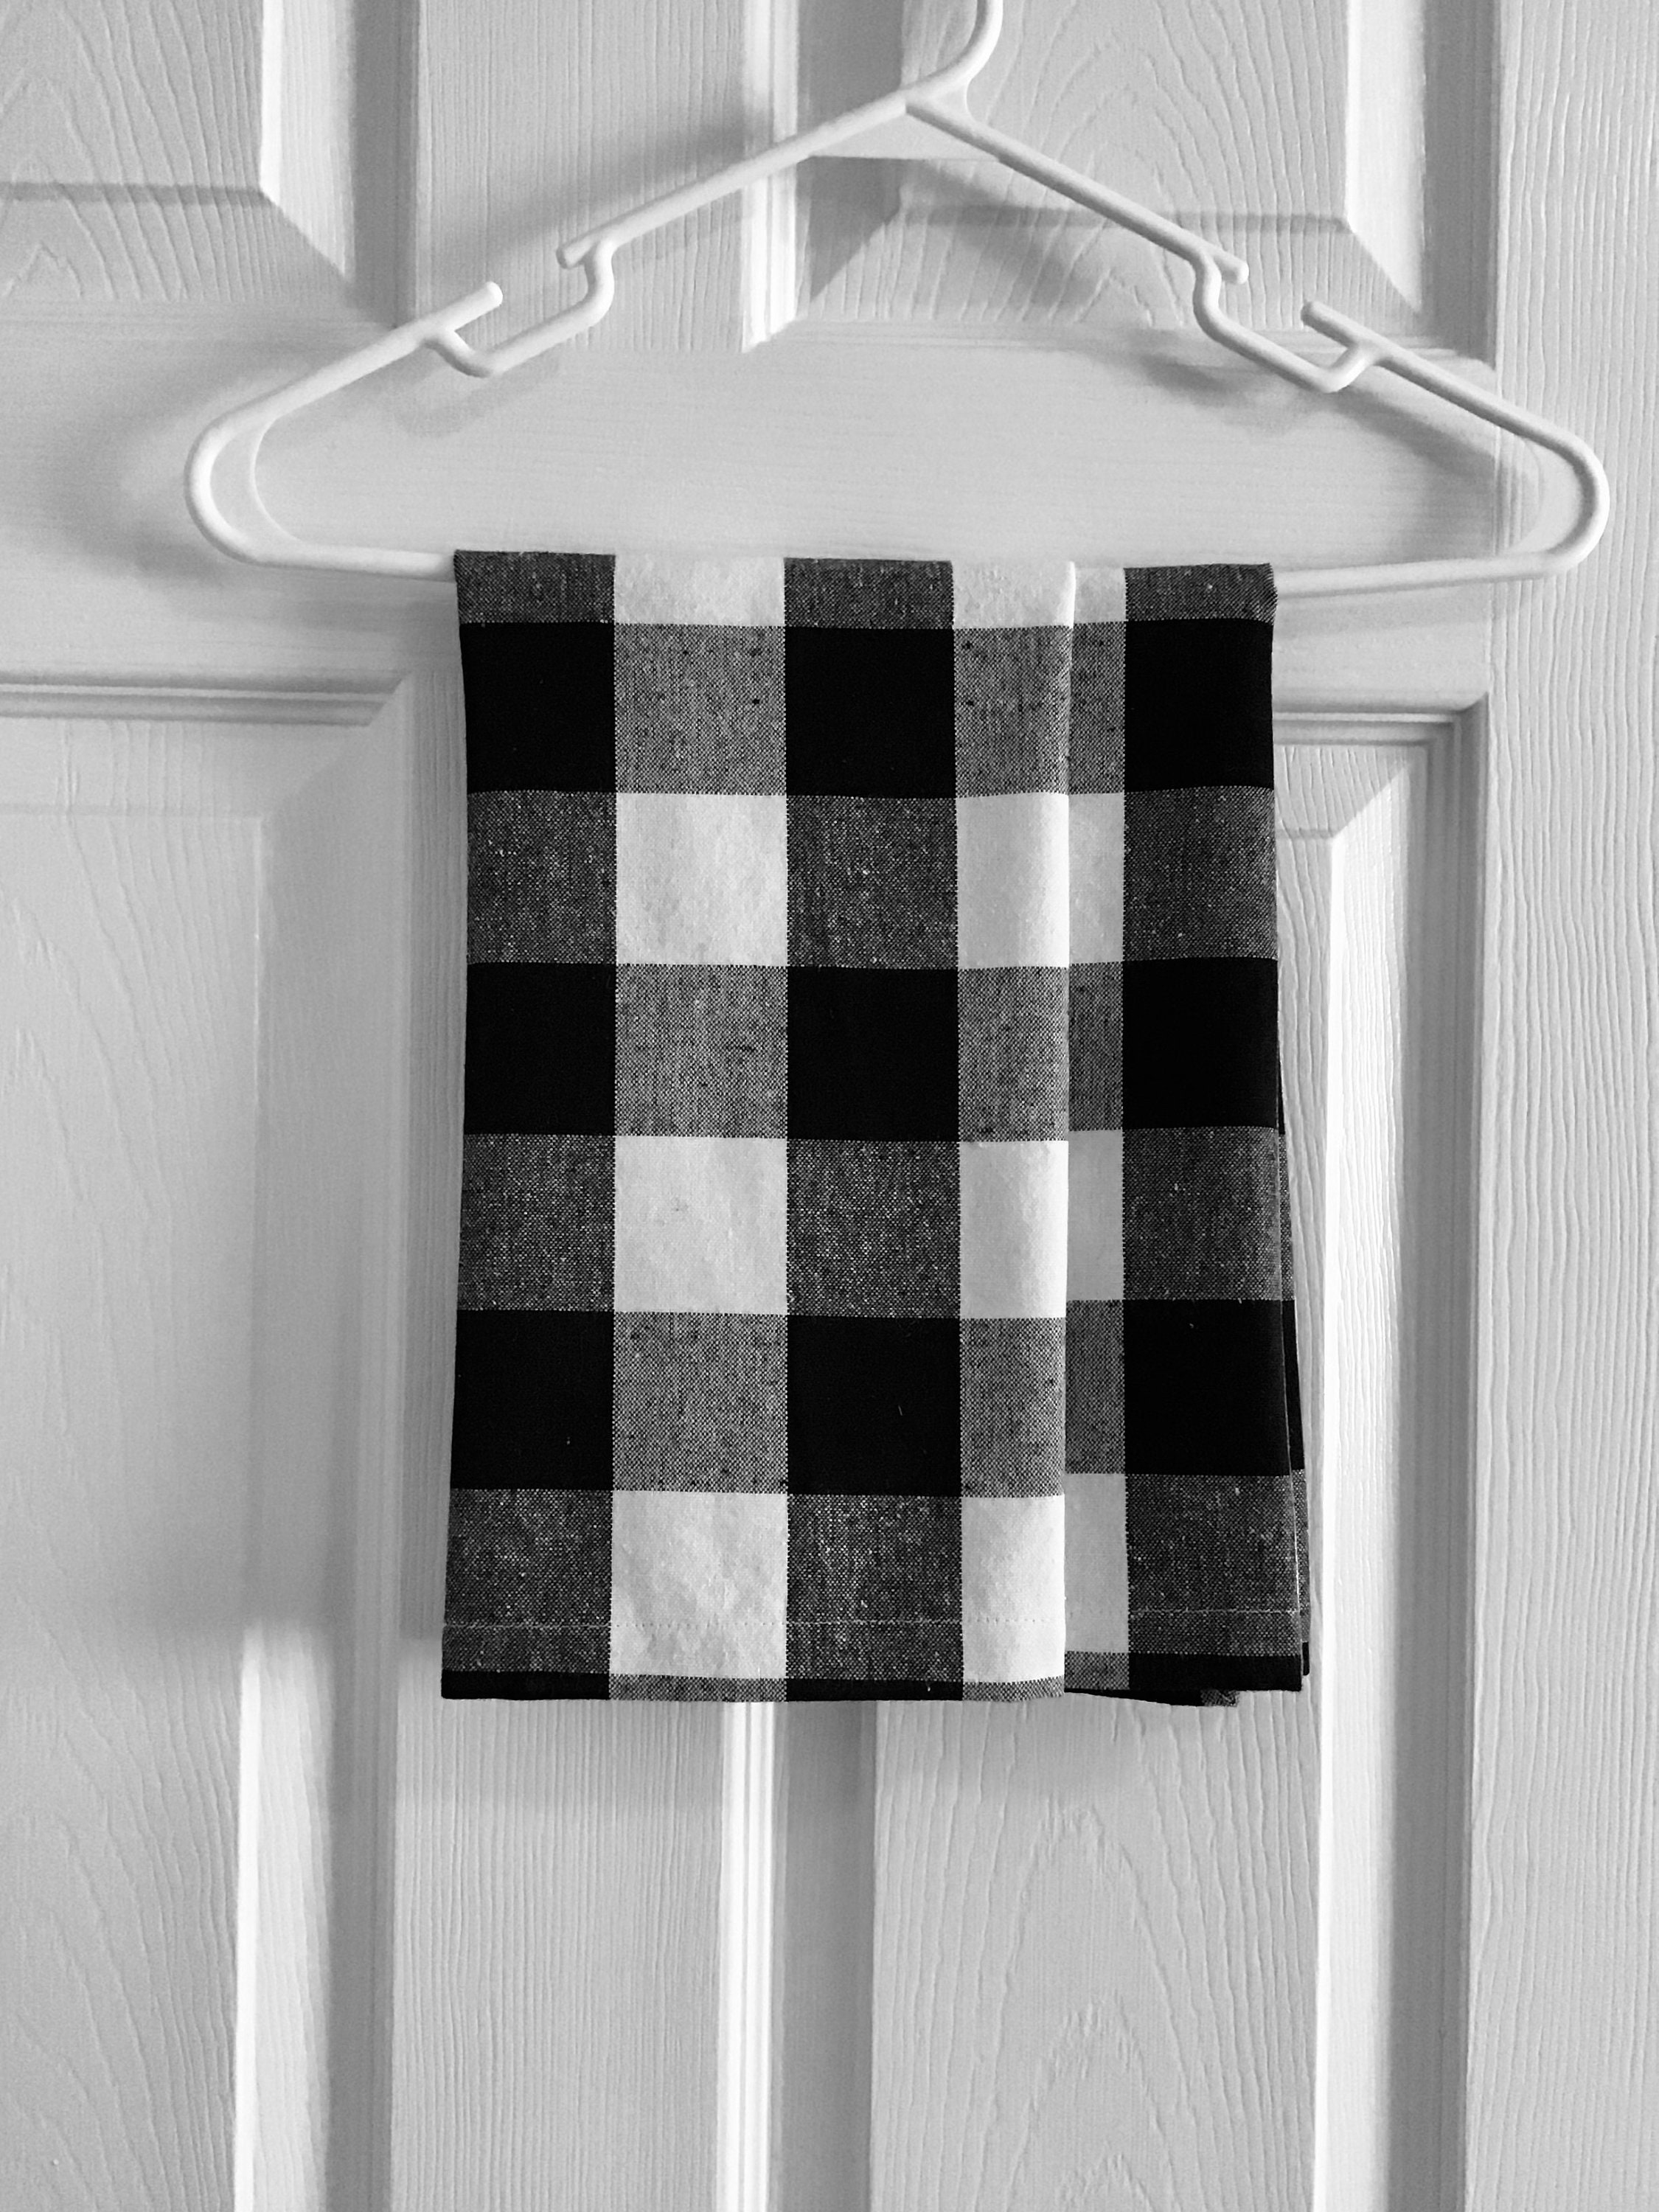 Buffalo Check Towels / French Country Kitchen / Red Check / Cabin Decor /  Rustic Decor / Red White Kitchen / Tartan Tea Towels 